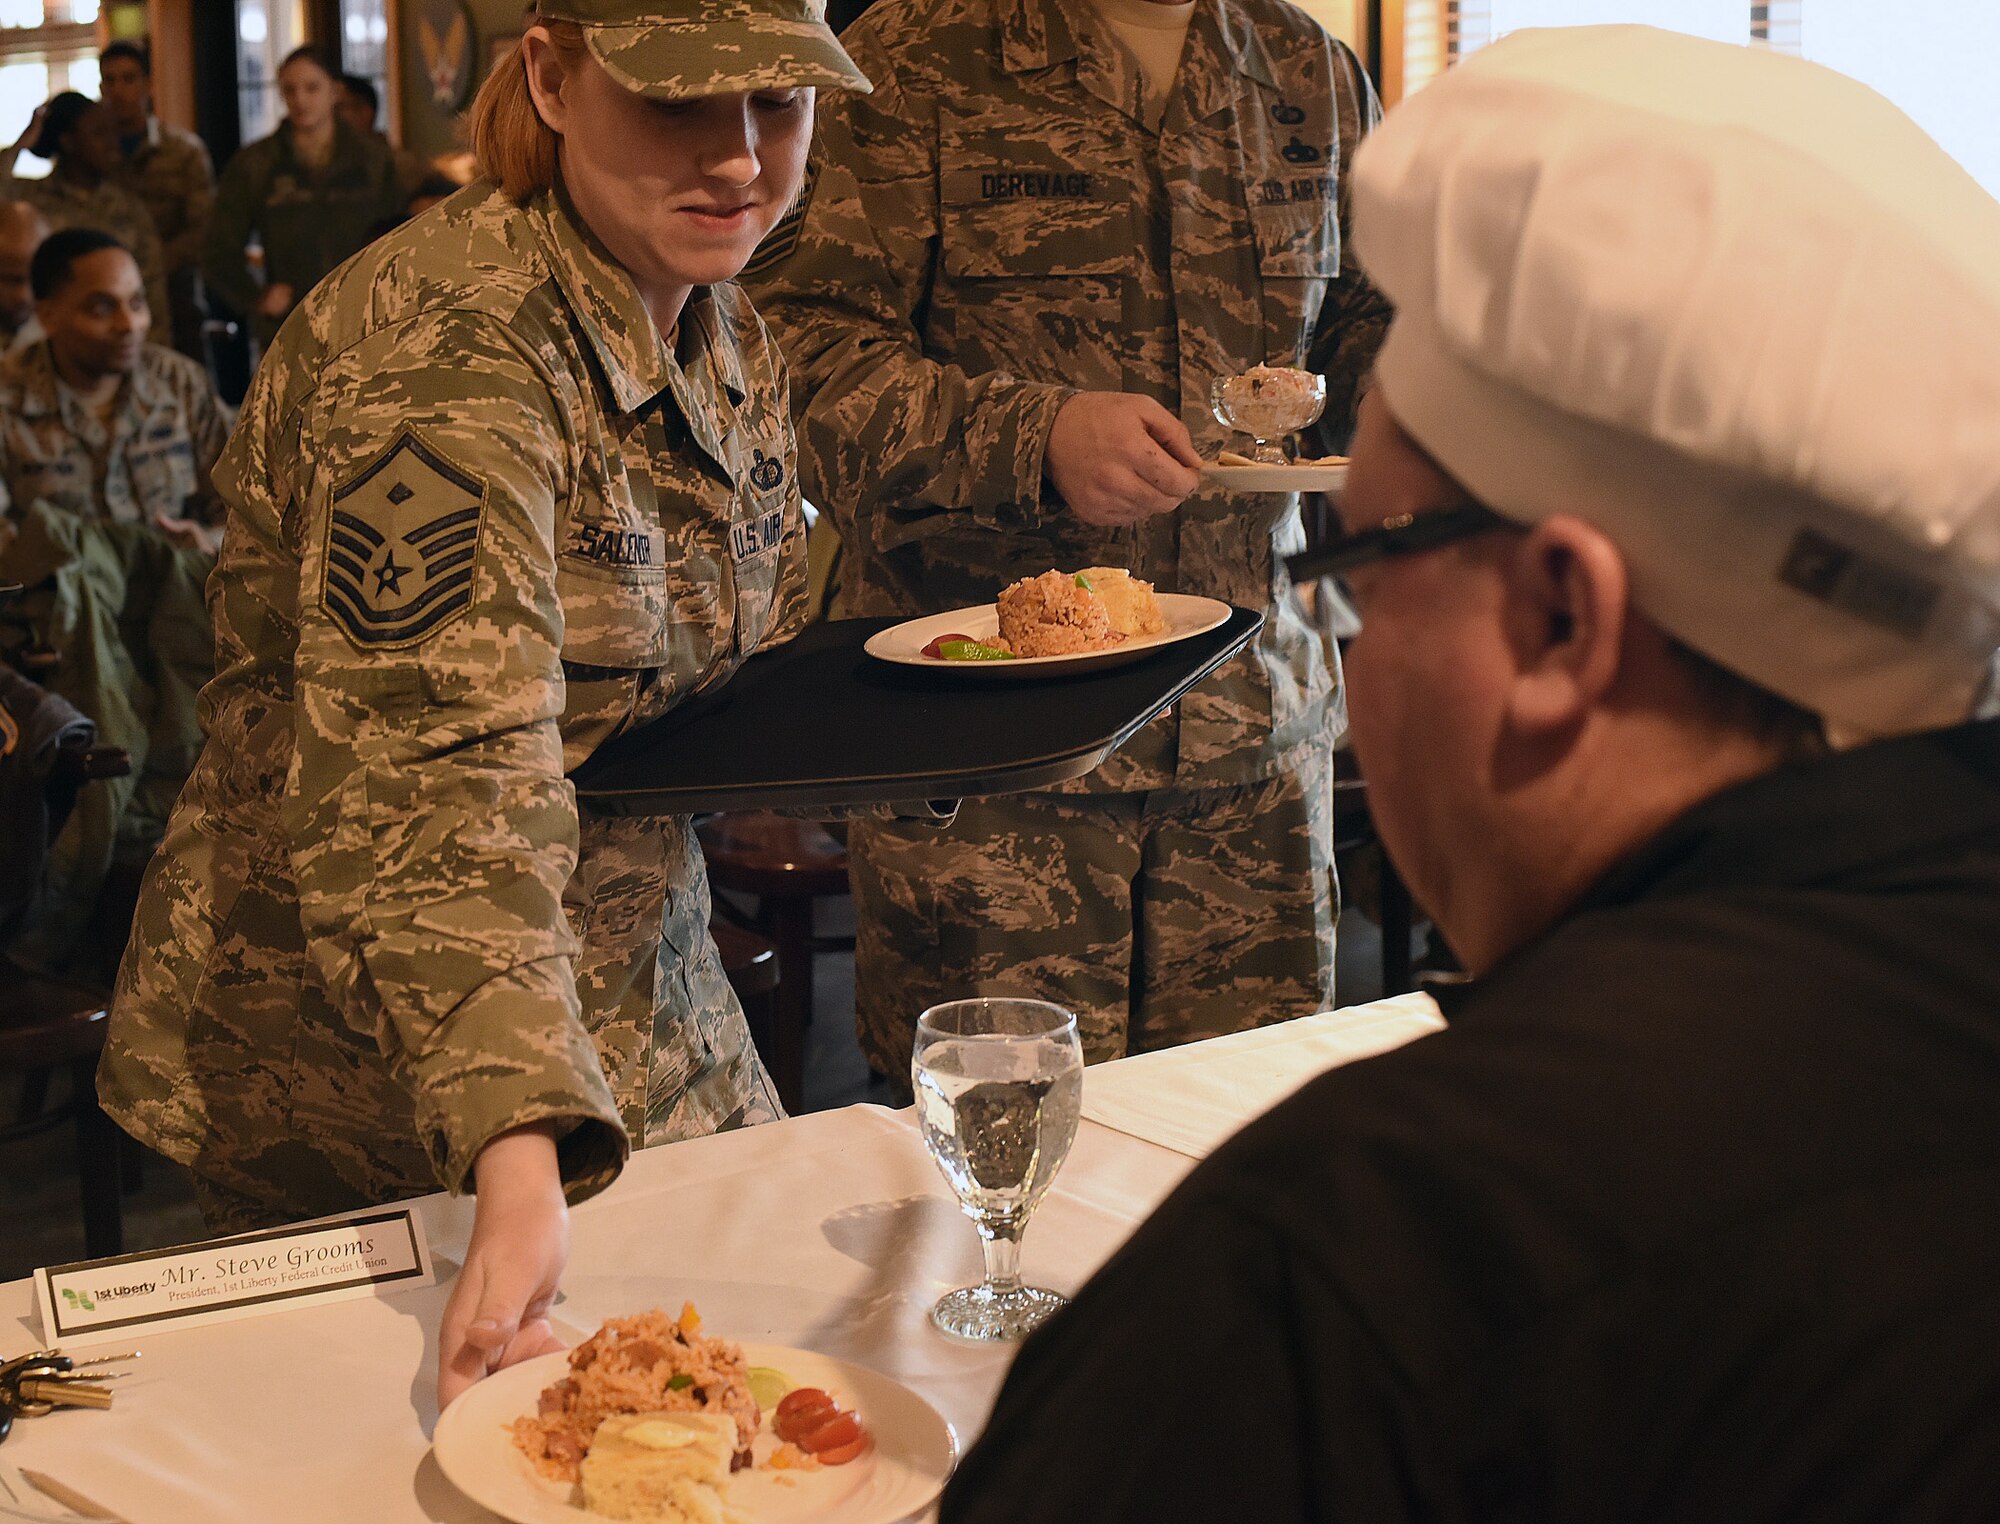 Master Sgt. Ruth Salender, 341st Operations Group first sergeant, places a prepared meal in front of one of the judges during the Warrior Chef competition Feb. 24, 2017, at Malmstrom Air Force Base, Mont. Dishes were assessed by a panel of judges based on taste, texture, creativity, and if they honored the theme ingredients and presentation. (U.S. Air Force photo/Senior Airman Jaeda Tookes)